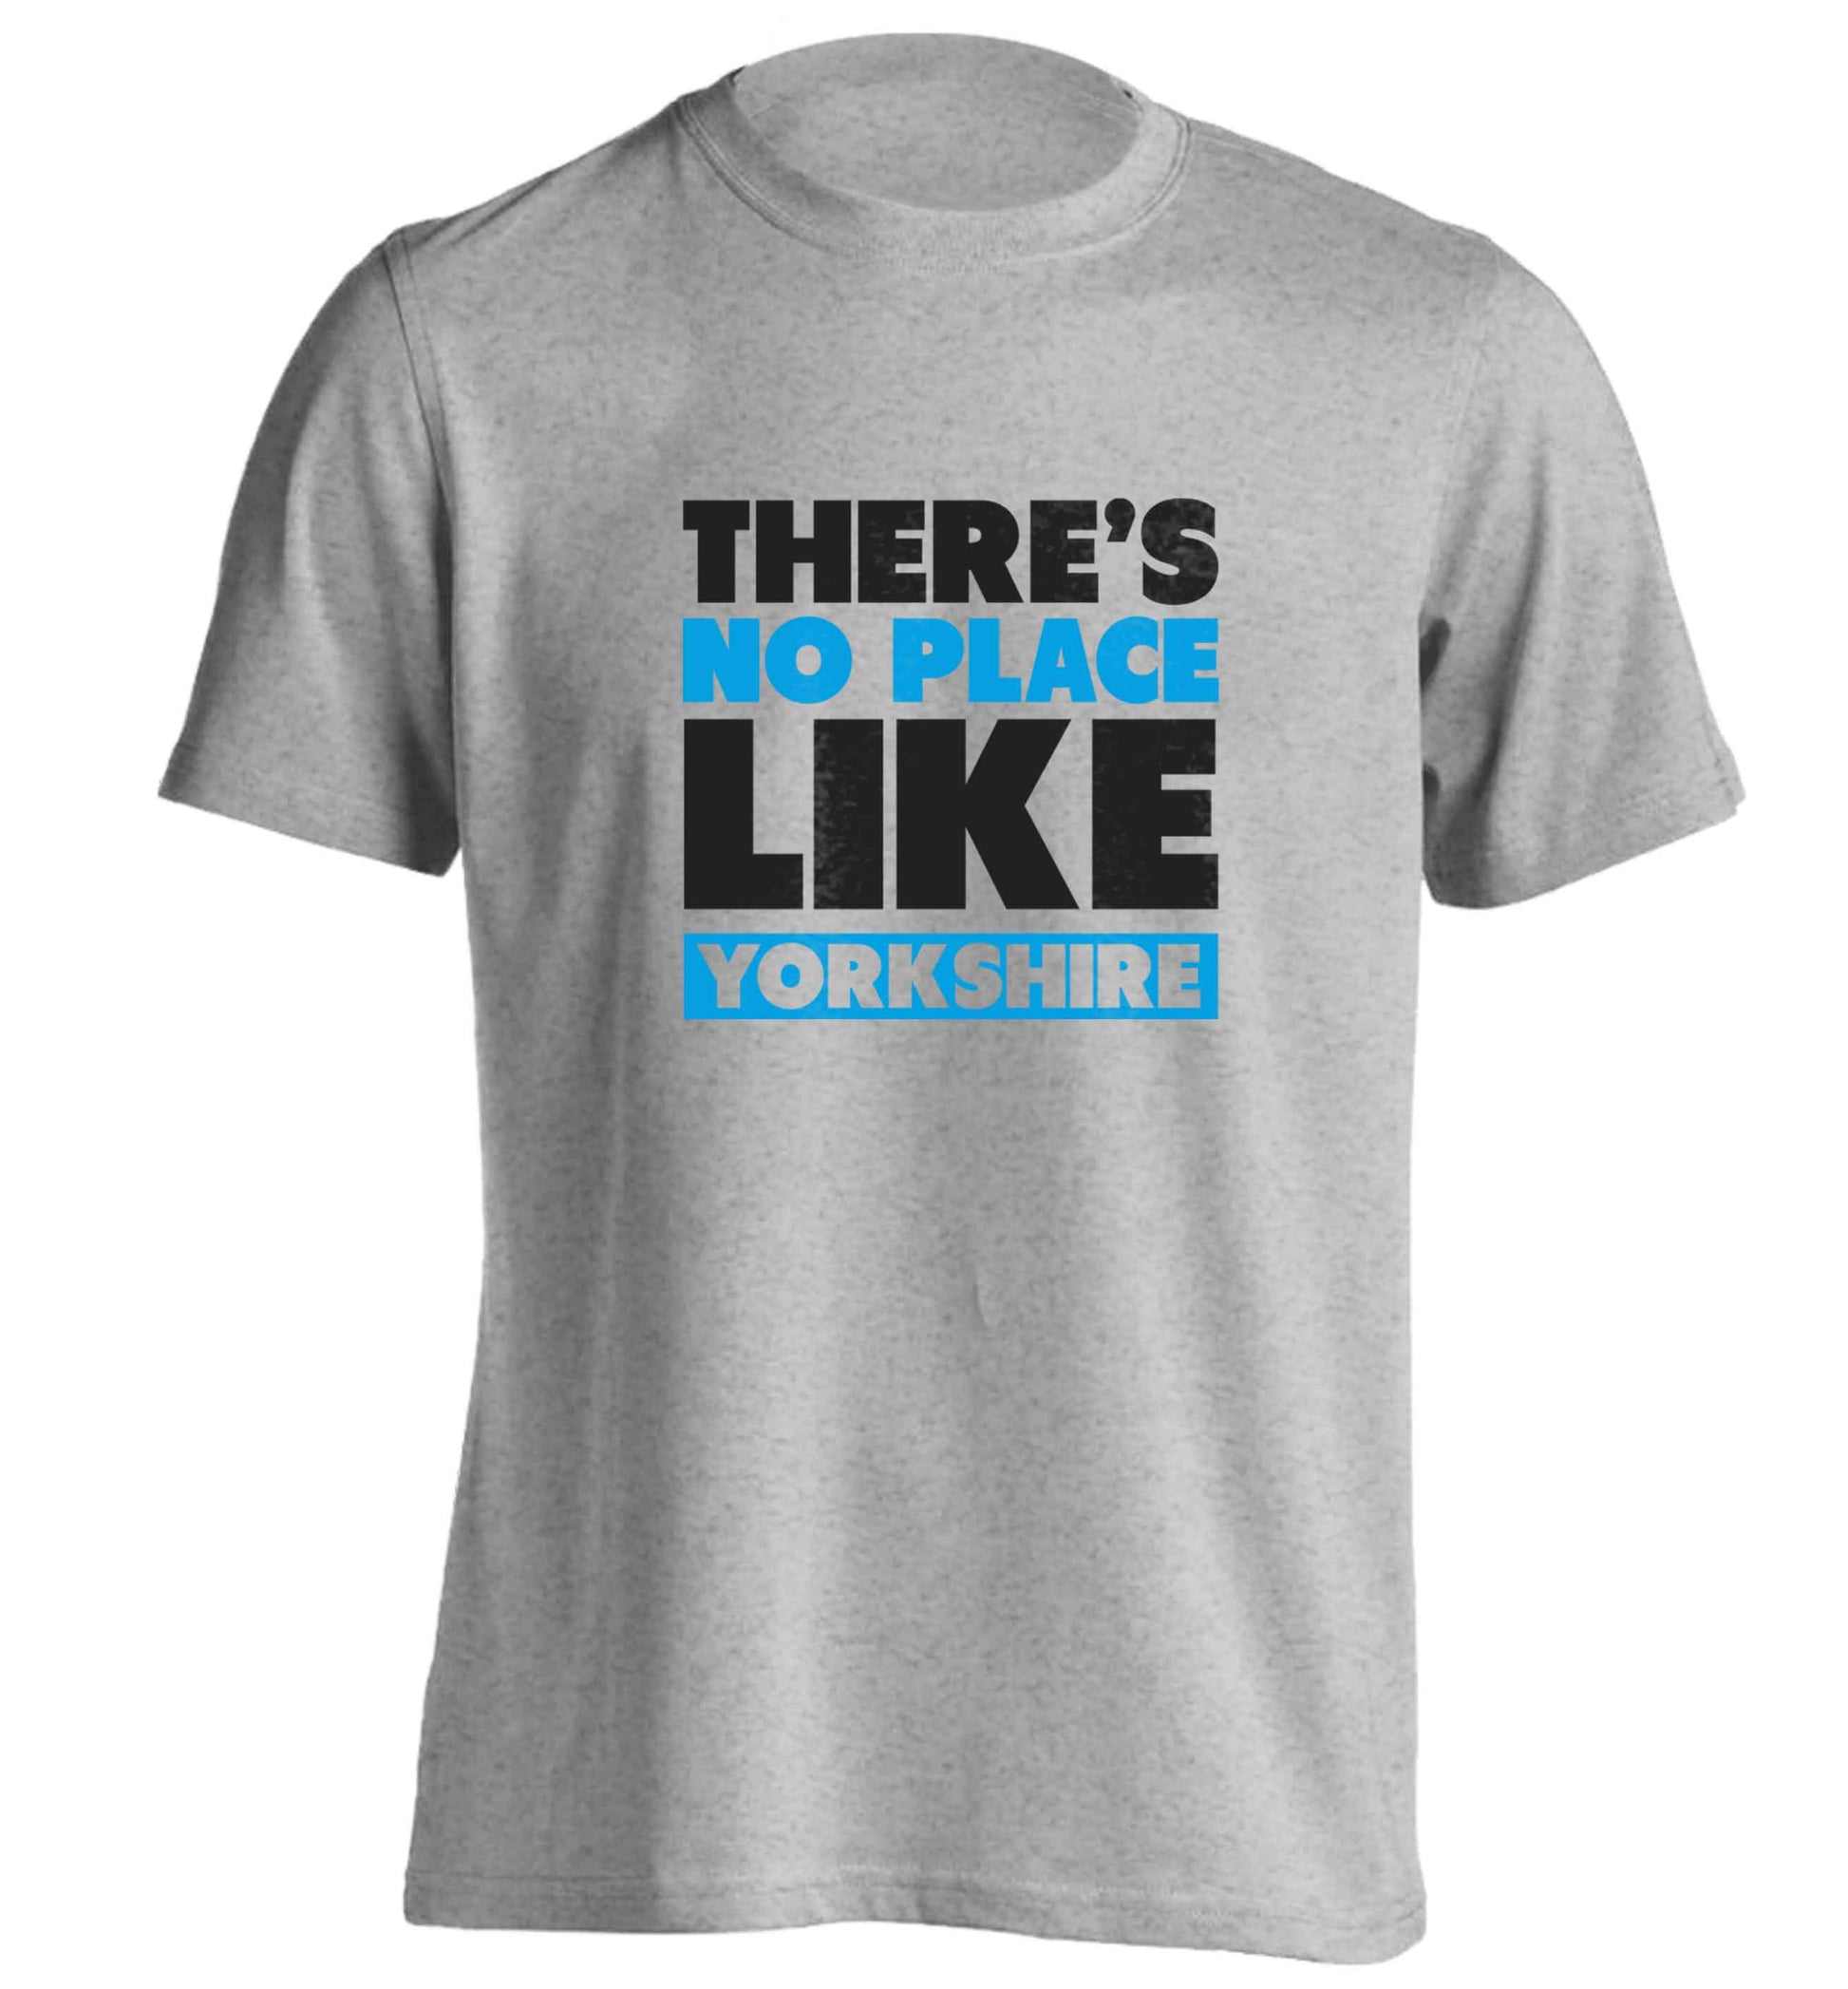 There's no place like Yorkshire adults unisex grey Tshirt 2XL